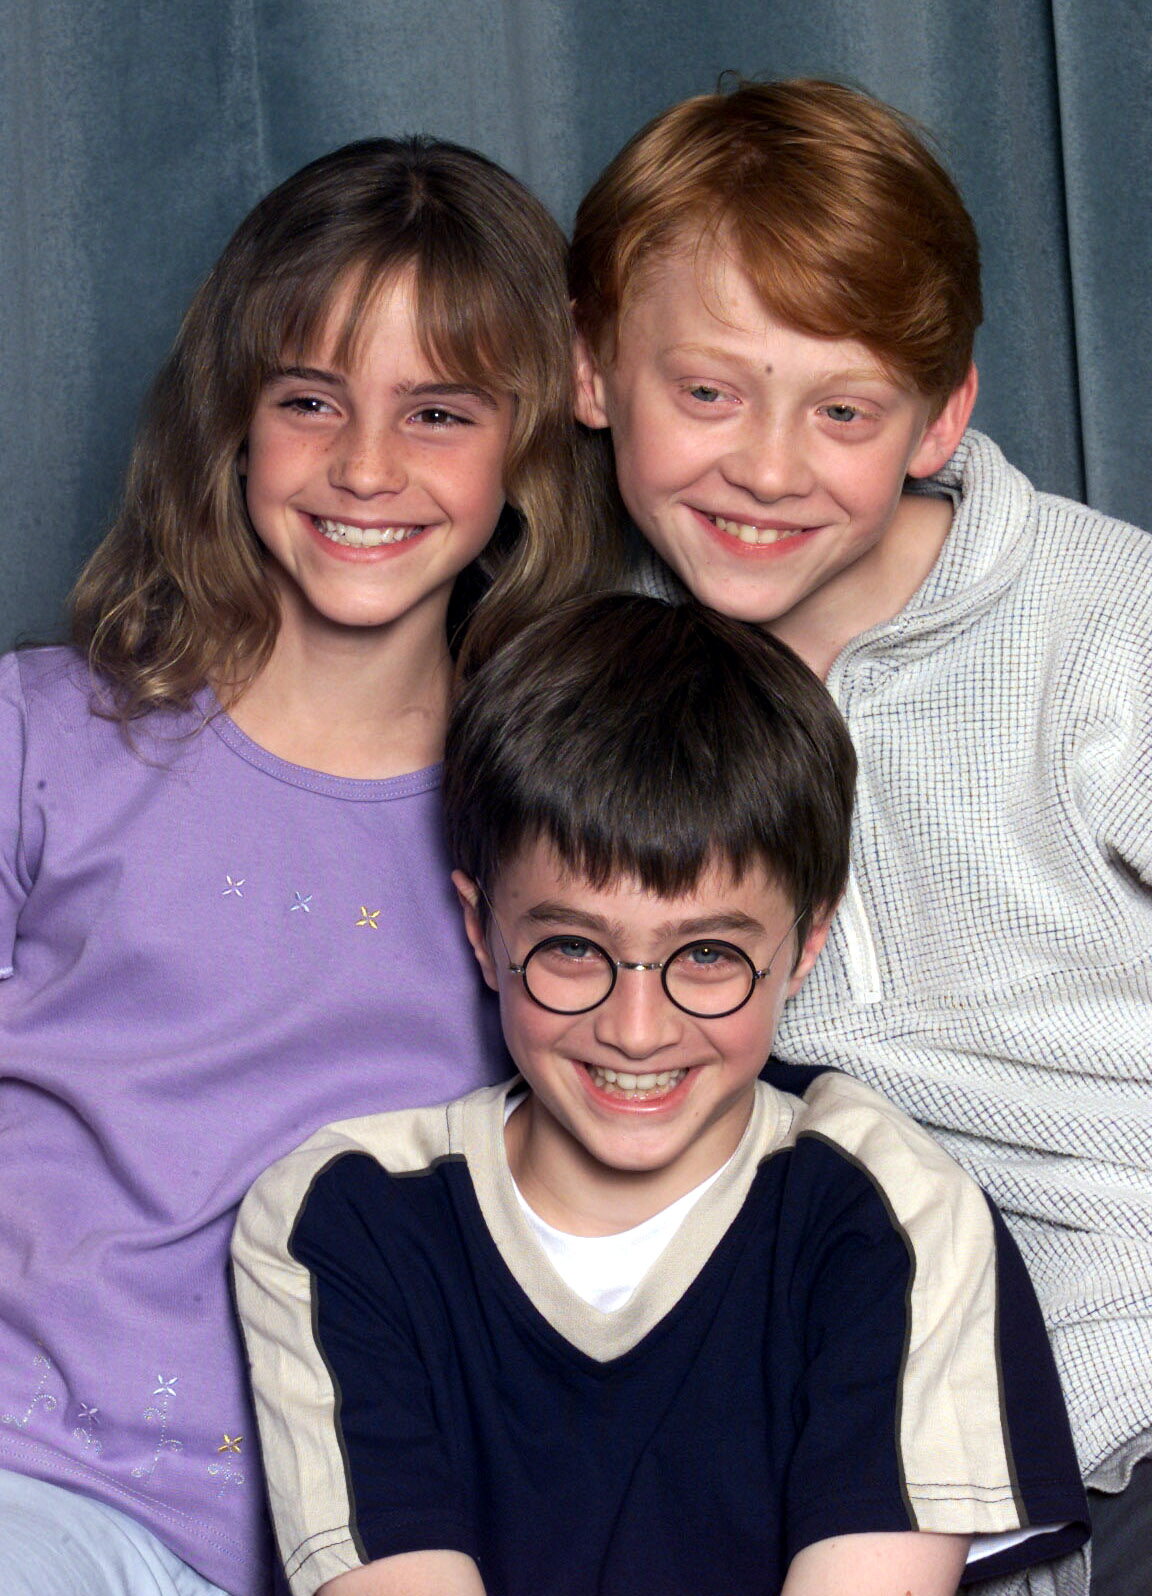 Emma Watson, Rupert Grint, and the boy at a press conference for the movie 